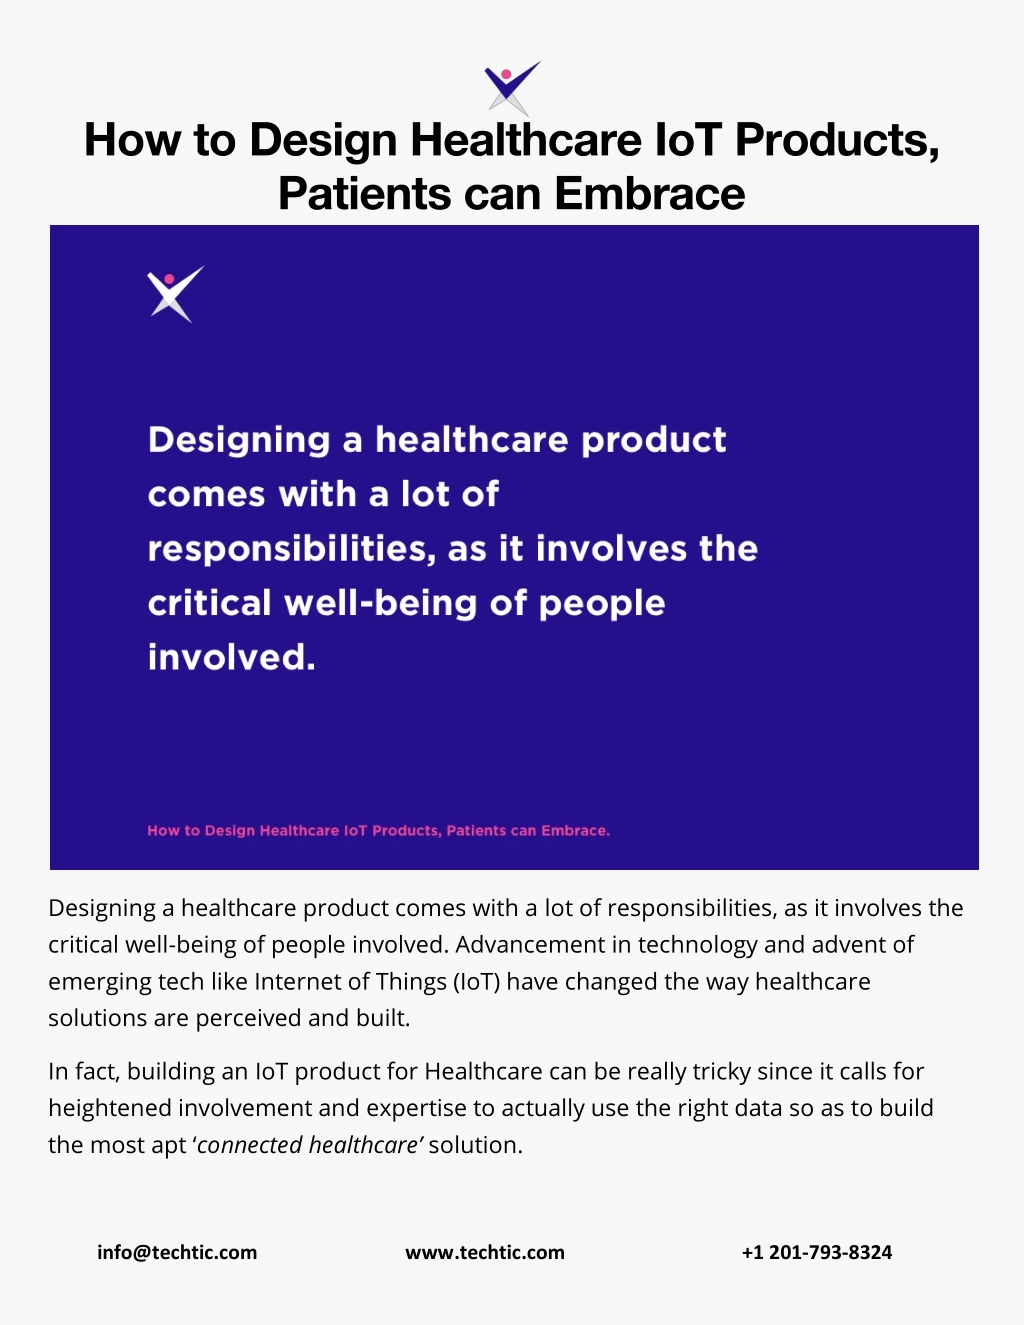 how to design healthcare iot products patients